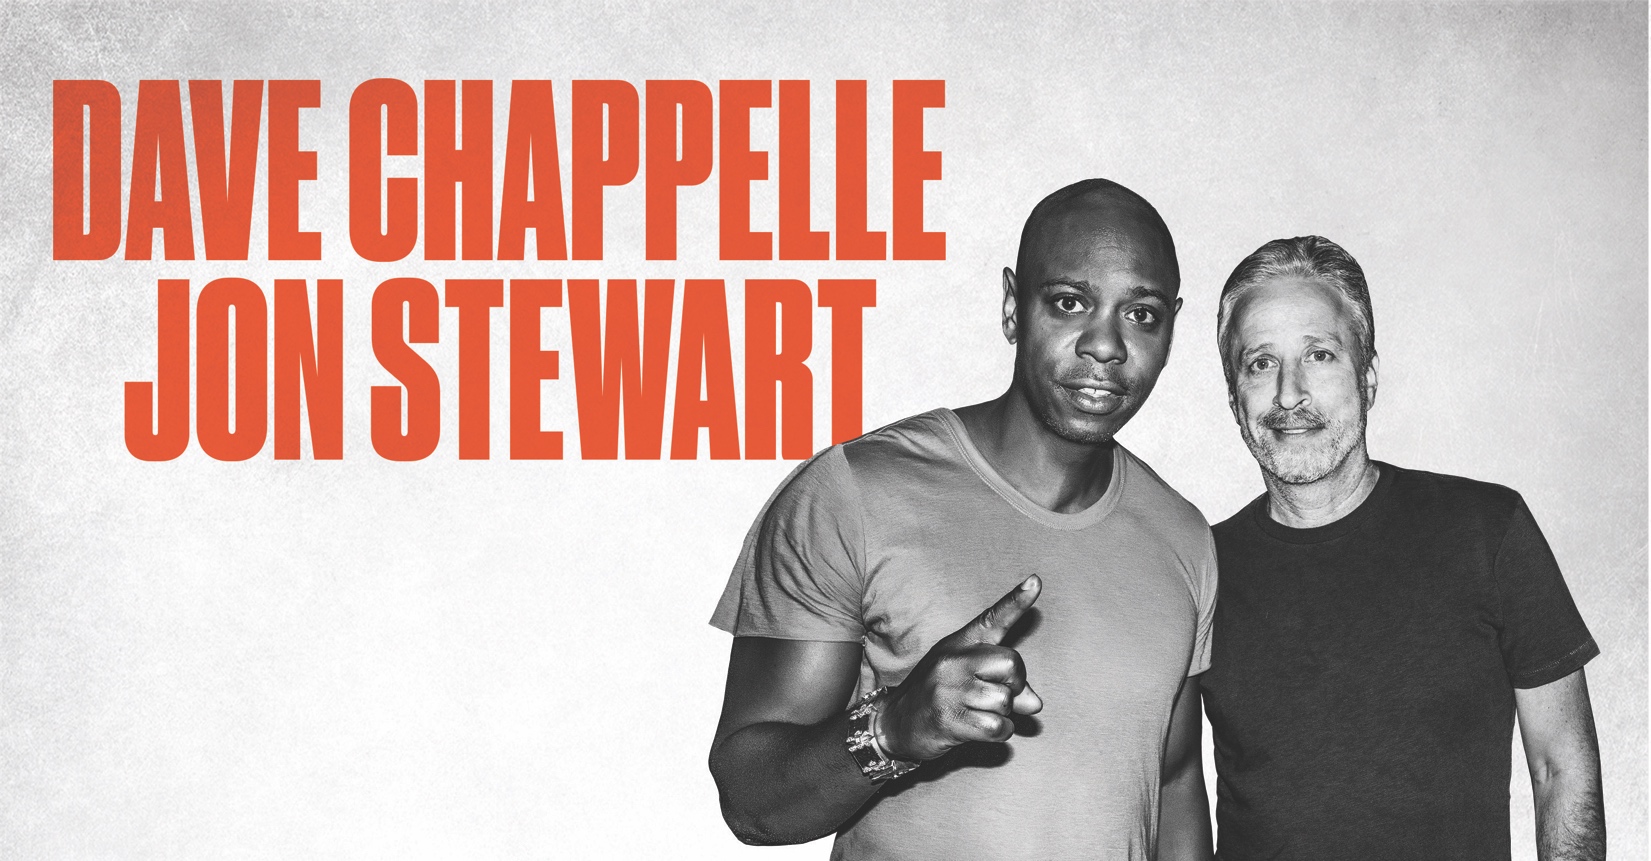 jon stewart and dave chappelle announce tour